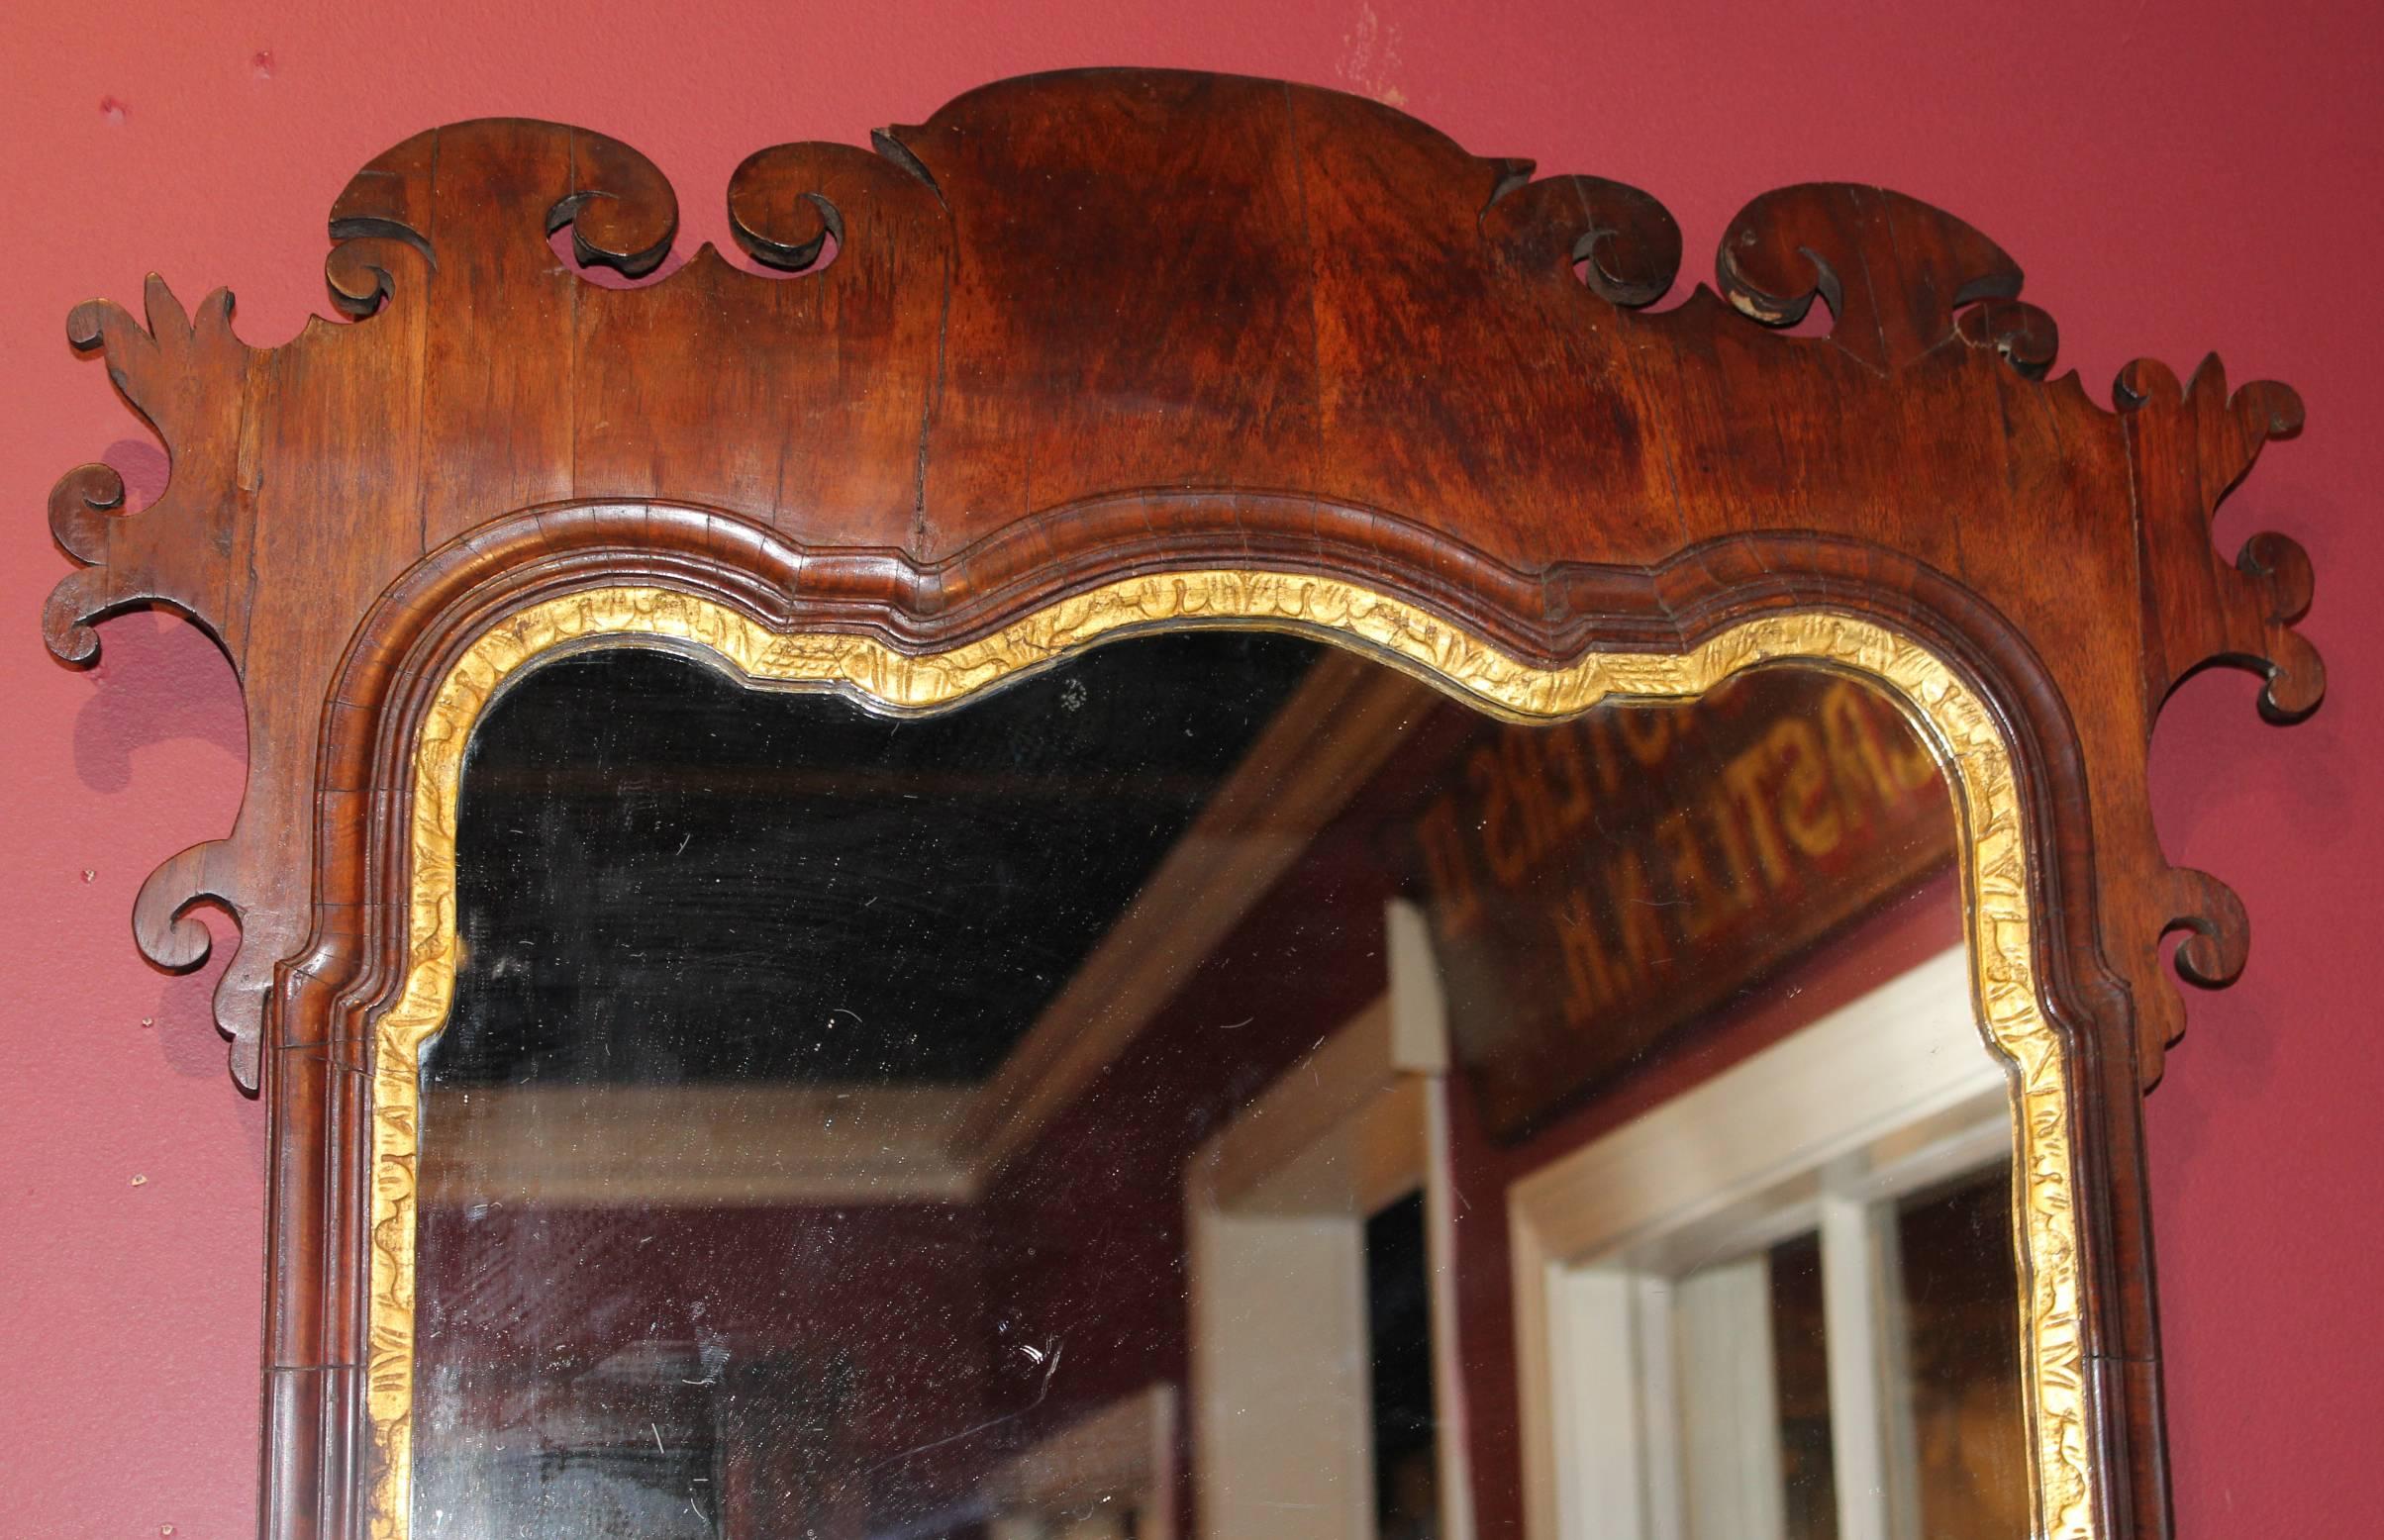 A fine example of an 18th century English Chippendale mahogany veneered looking glass or mirror with gilt decoration and delicately carved scrolled frames.